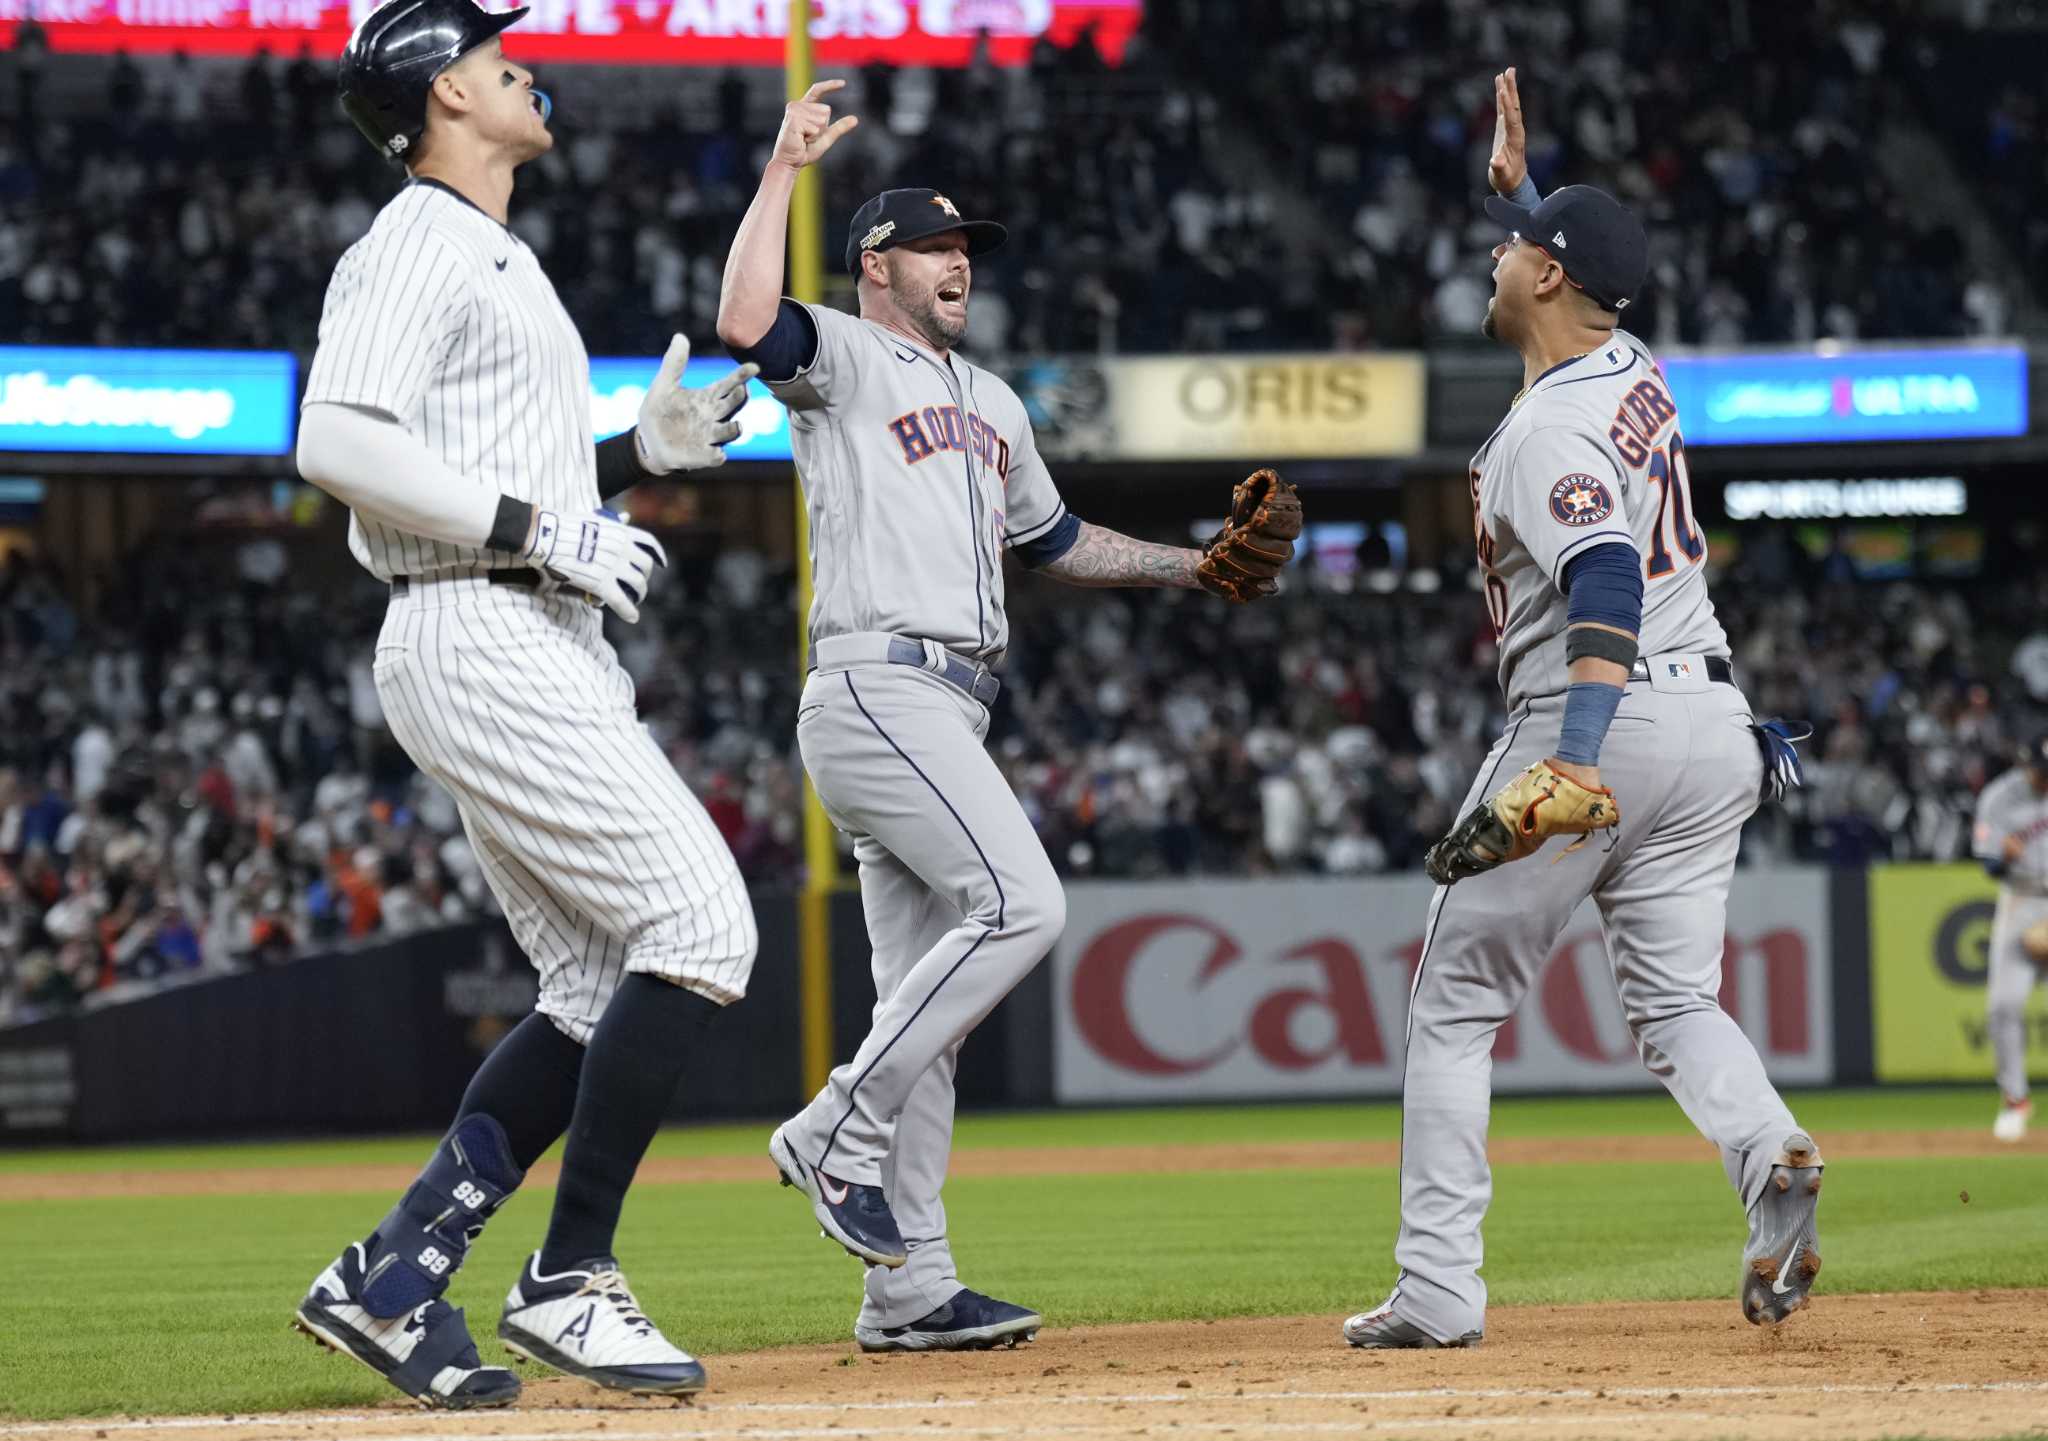 How the 2019 Yankees compare to the 2009 championship team